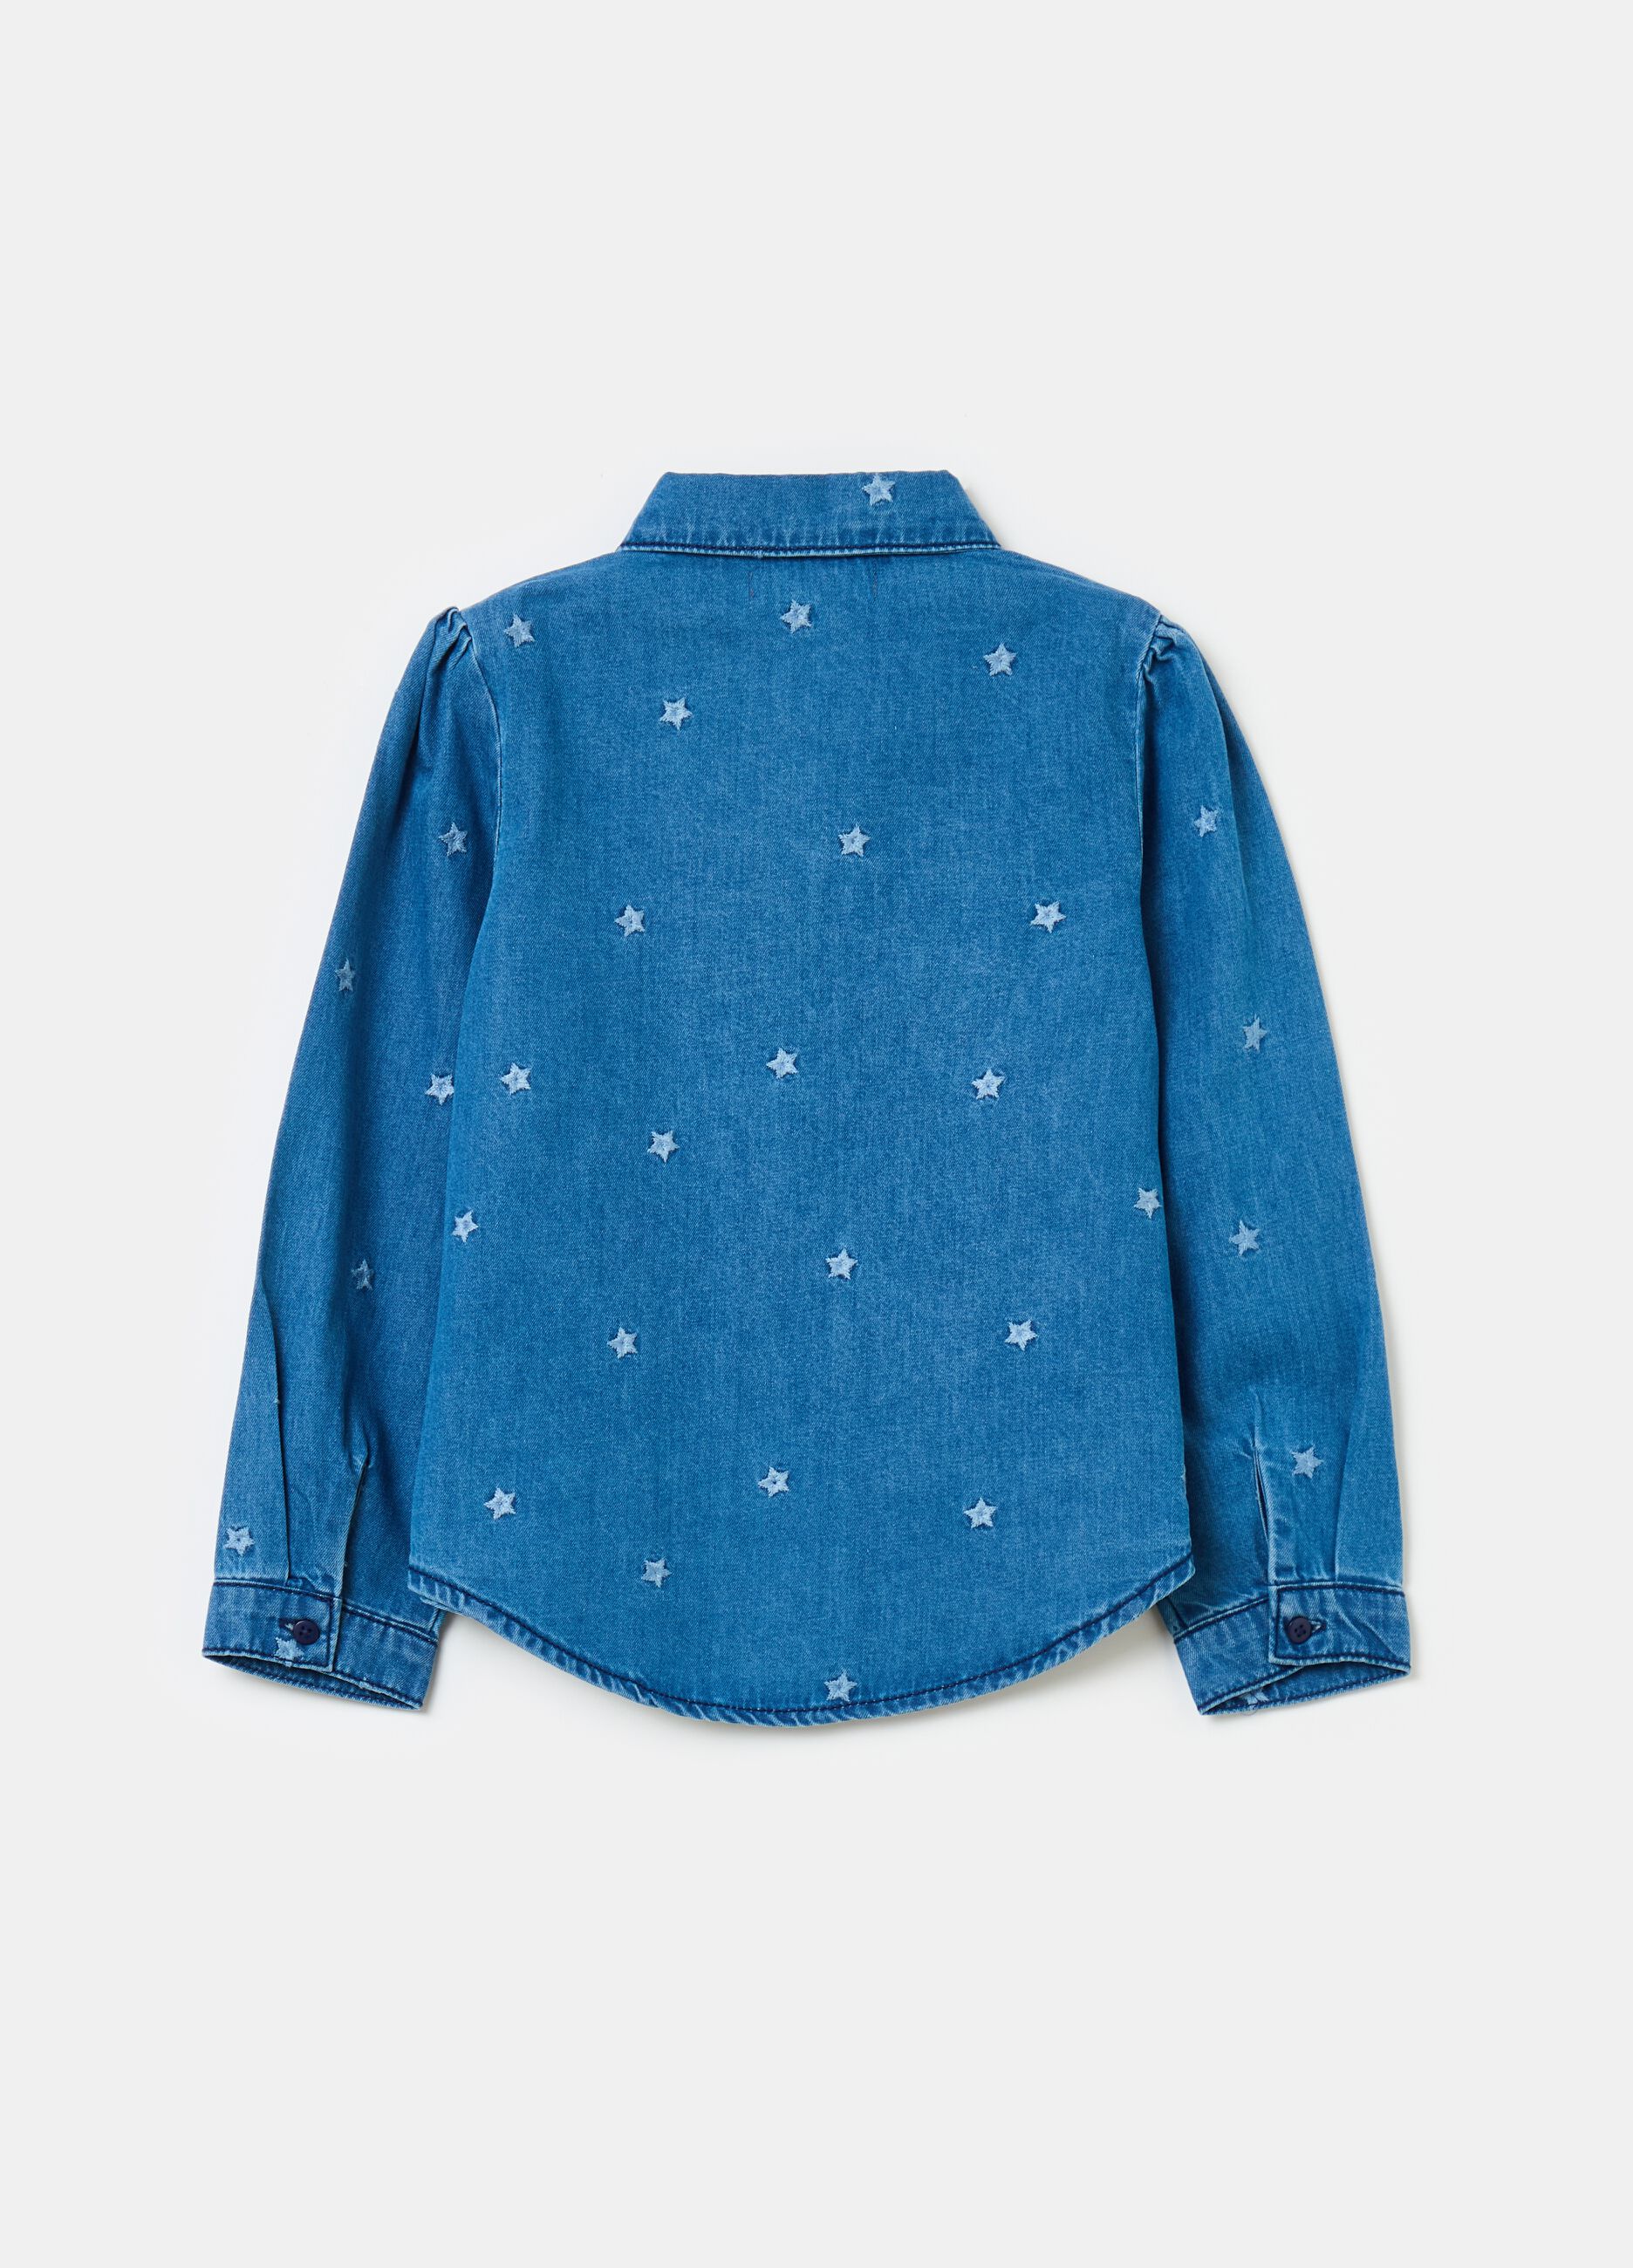 Denim shirt with stars embroidery